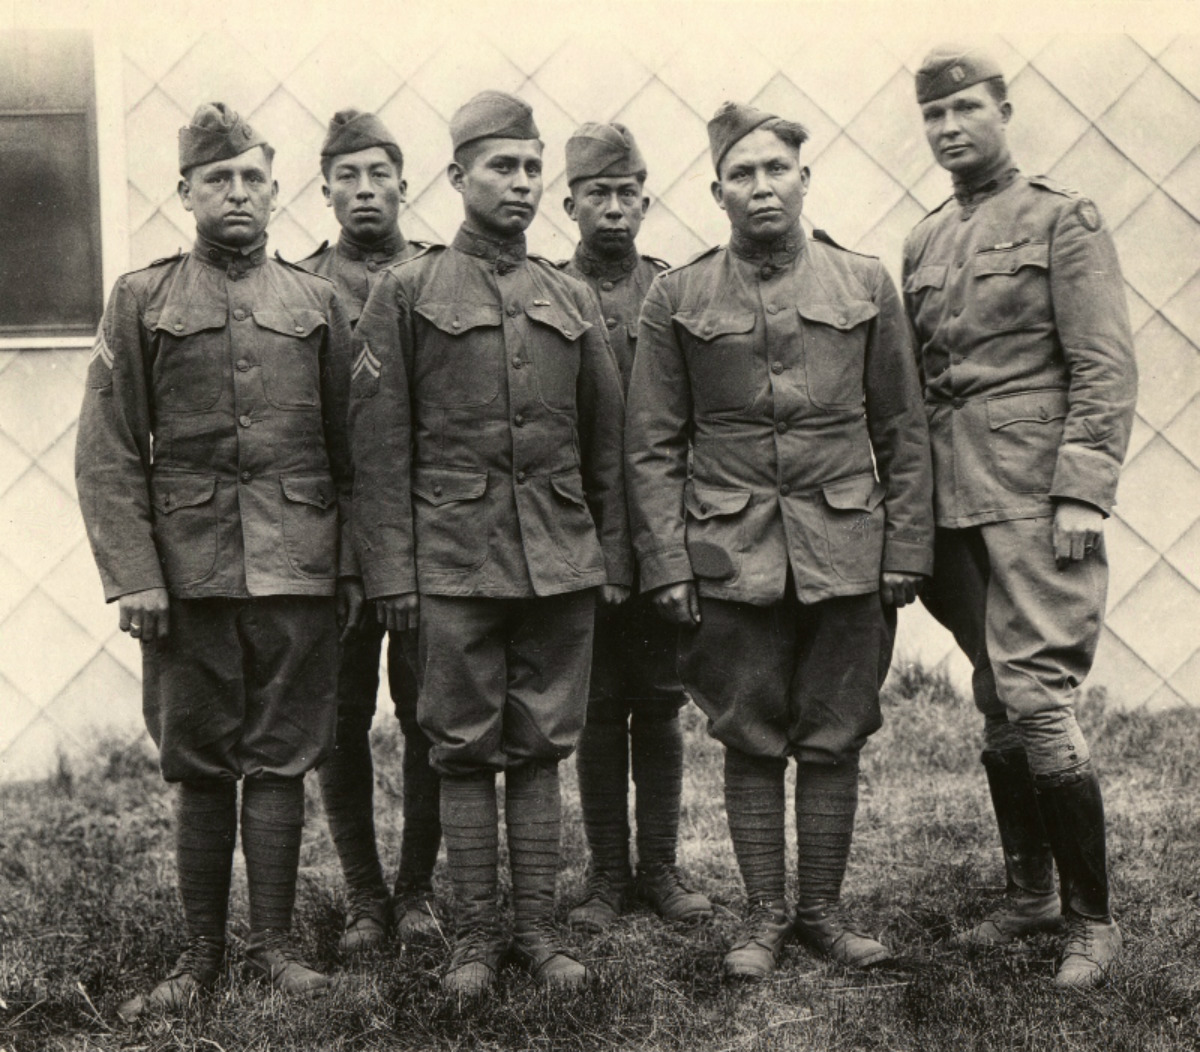 A historic photo of a small group of native american men in world war one uniforms posing in front of a wooden building.